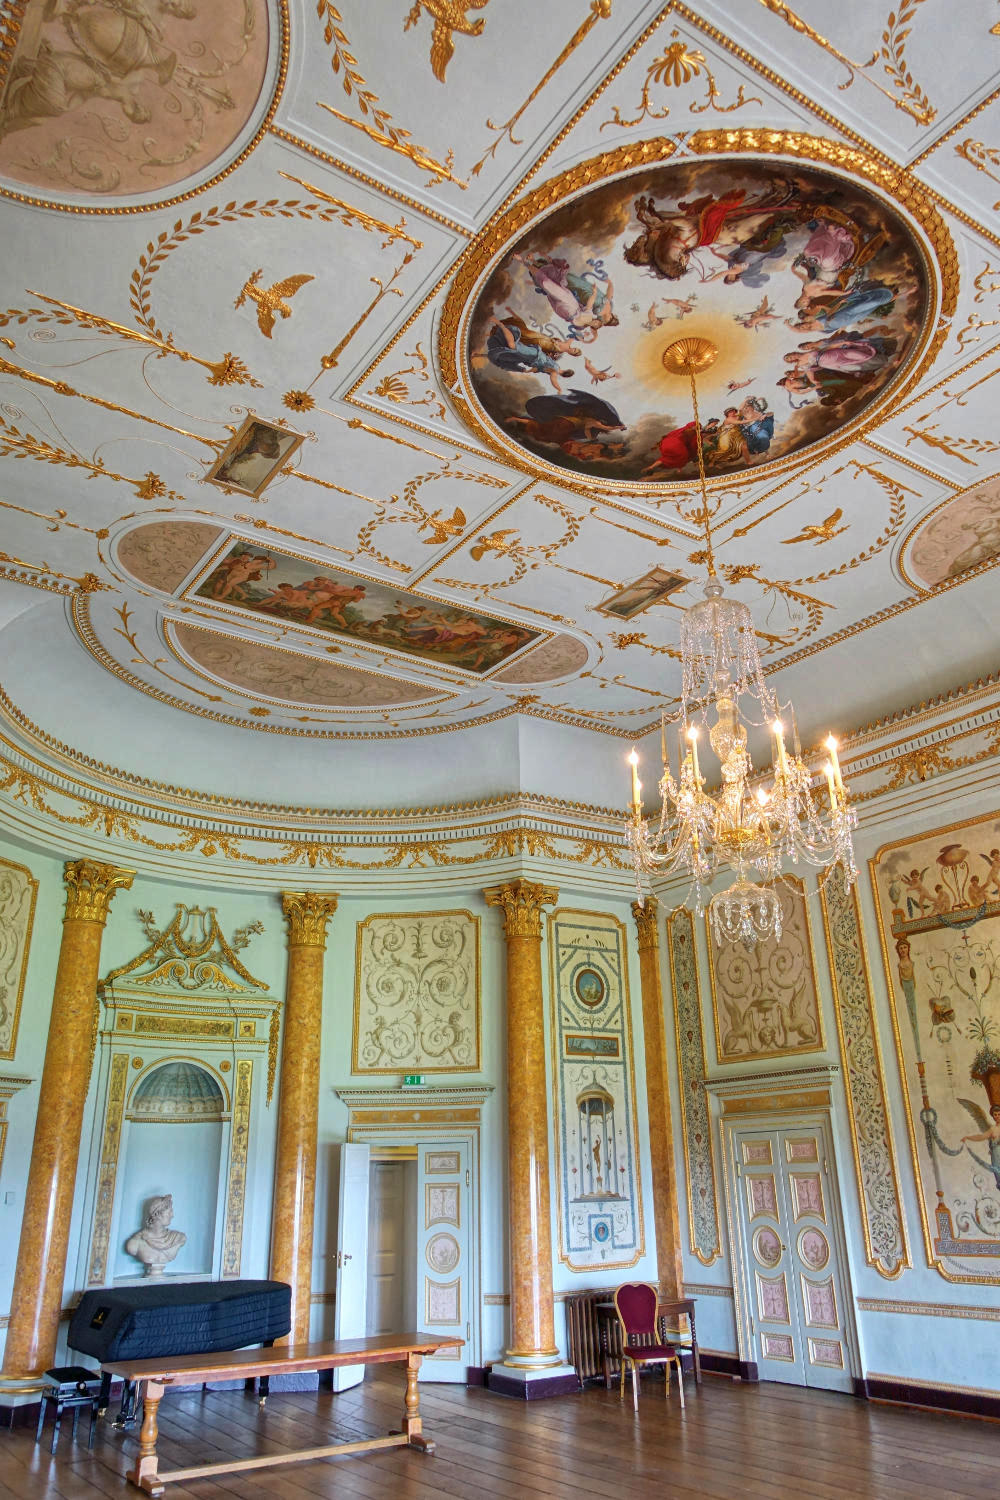 State Music Room at Stowe House, Buckinghamshire. Credit Daderot